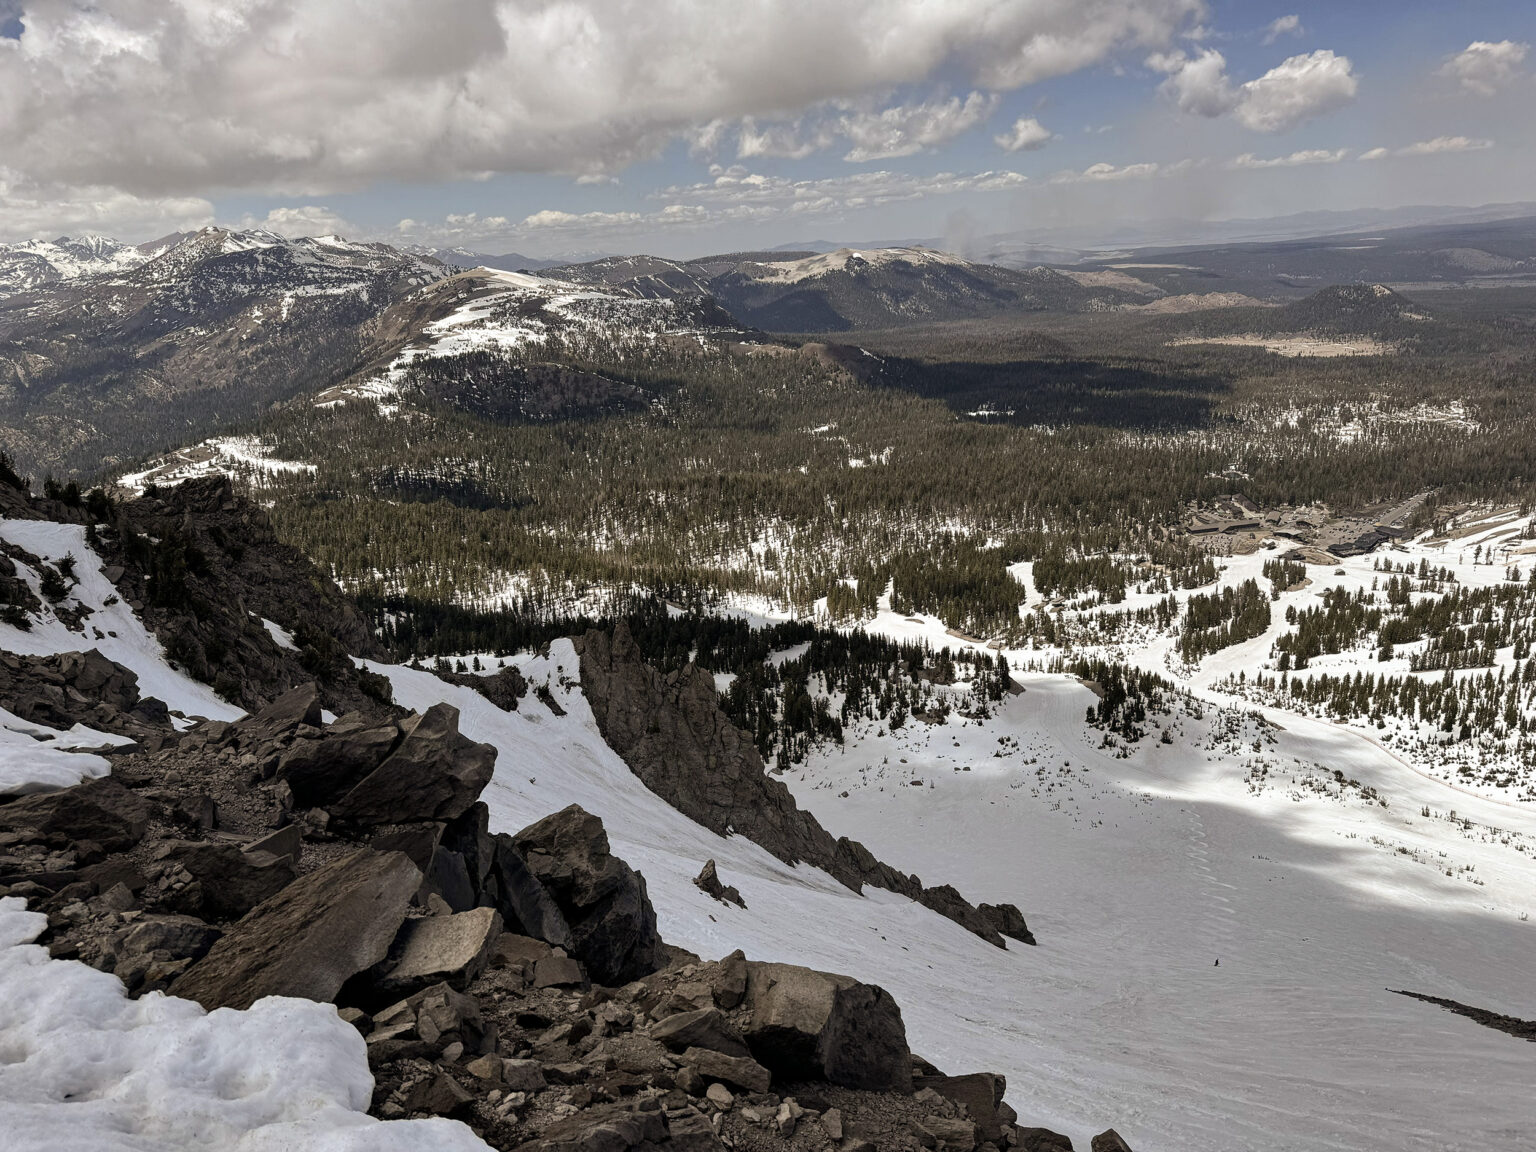 5-21-24 - A view from the Top of Mammoth Mountain